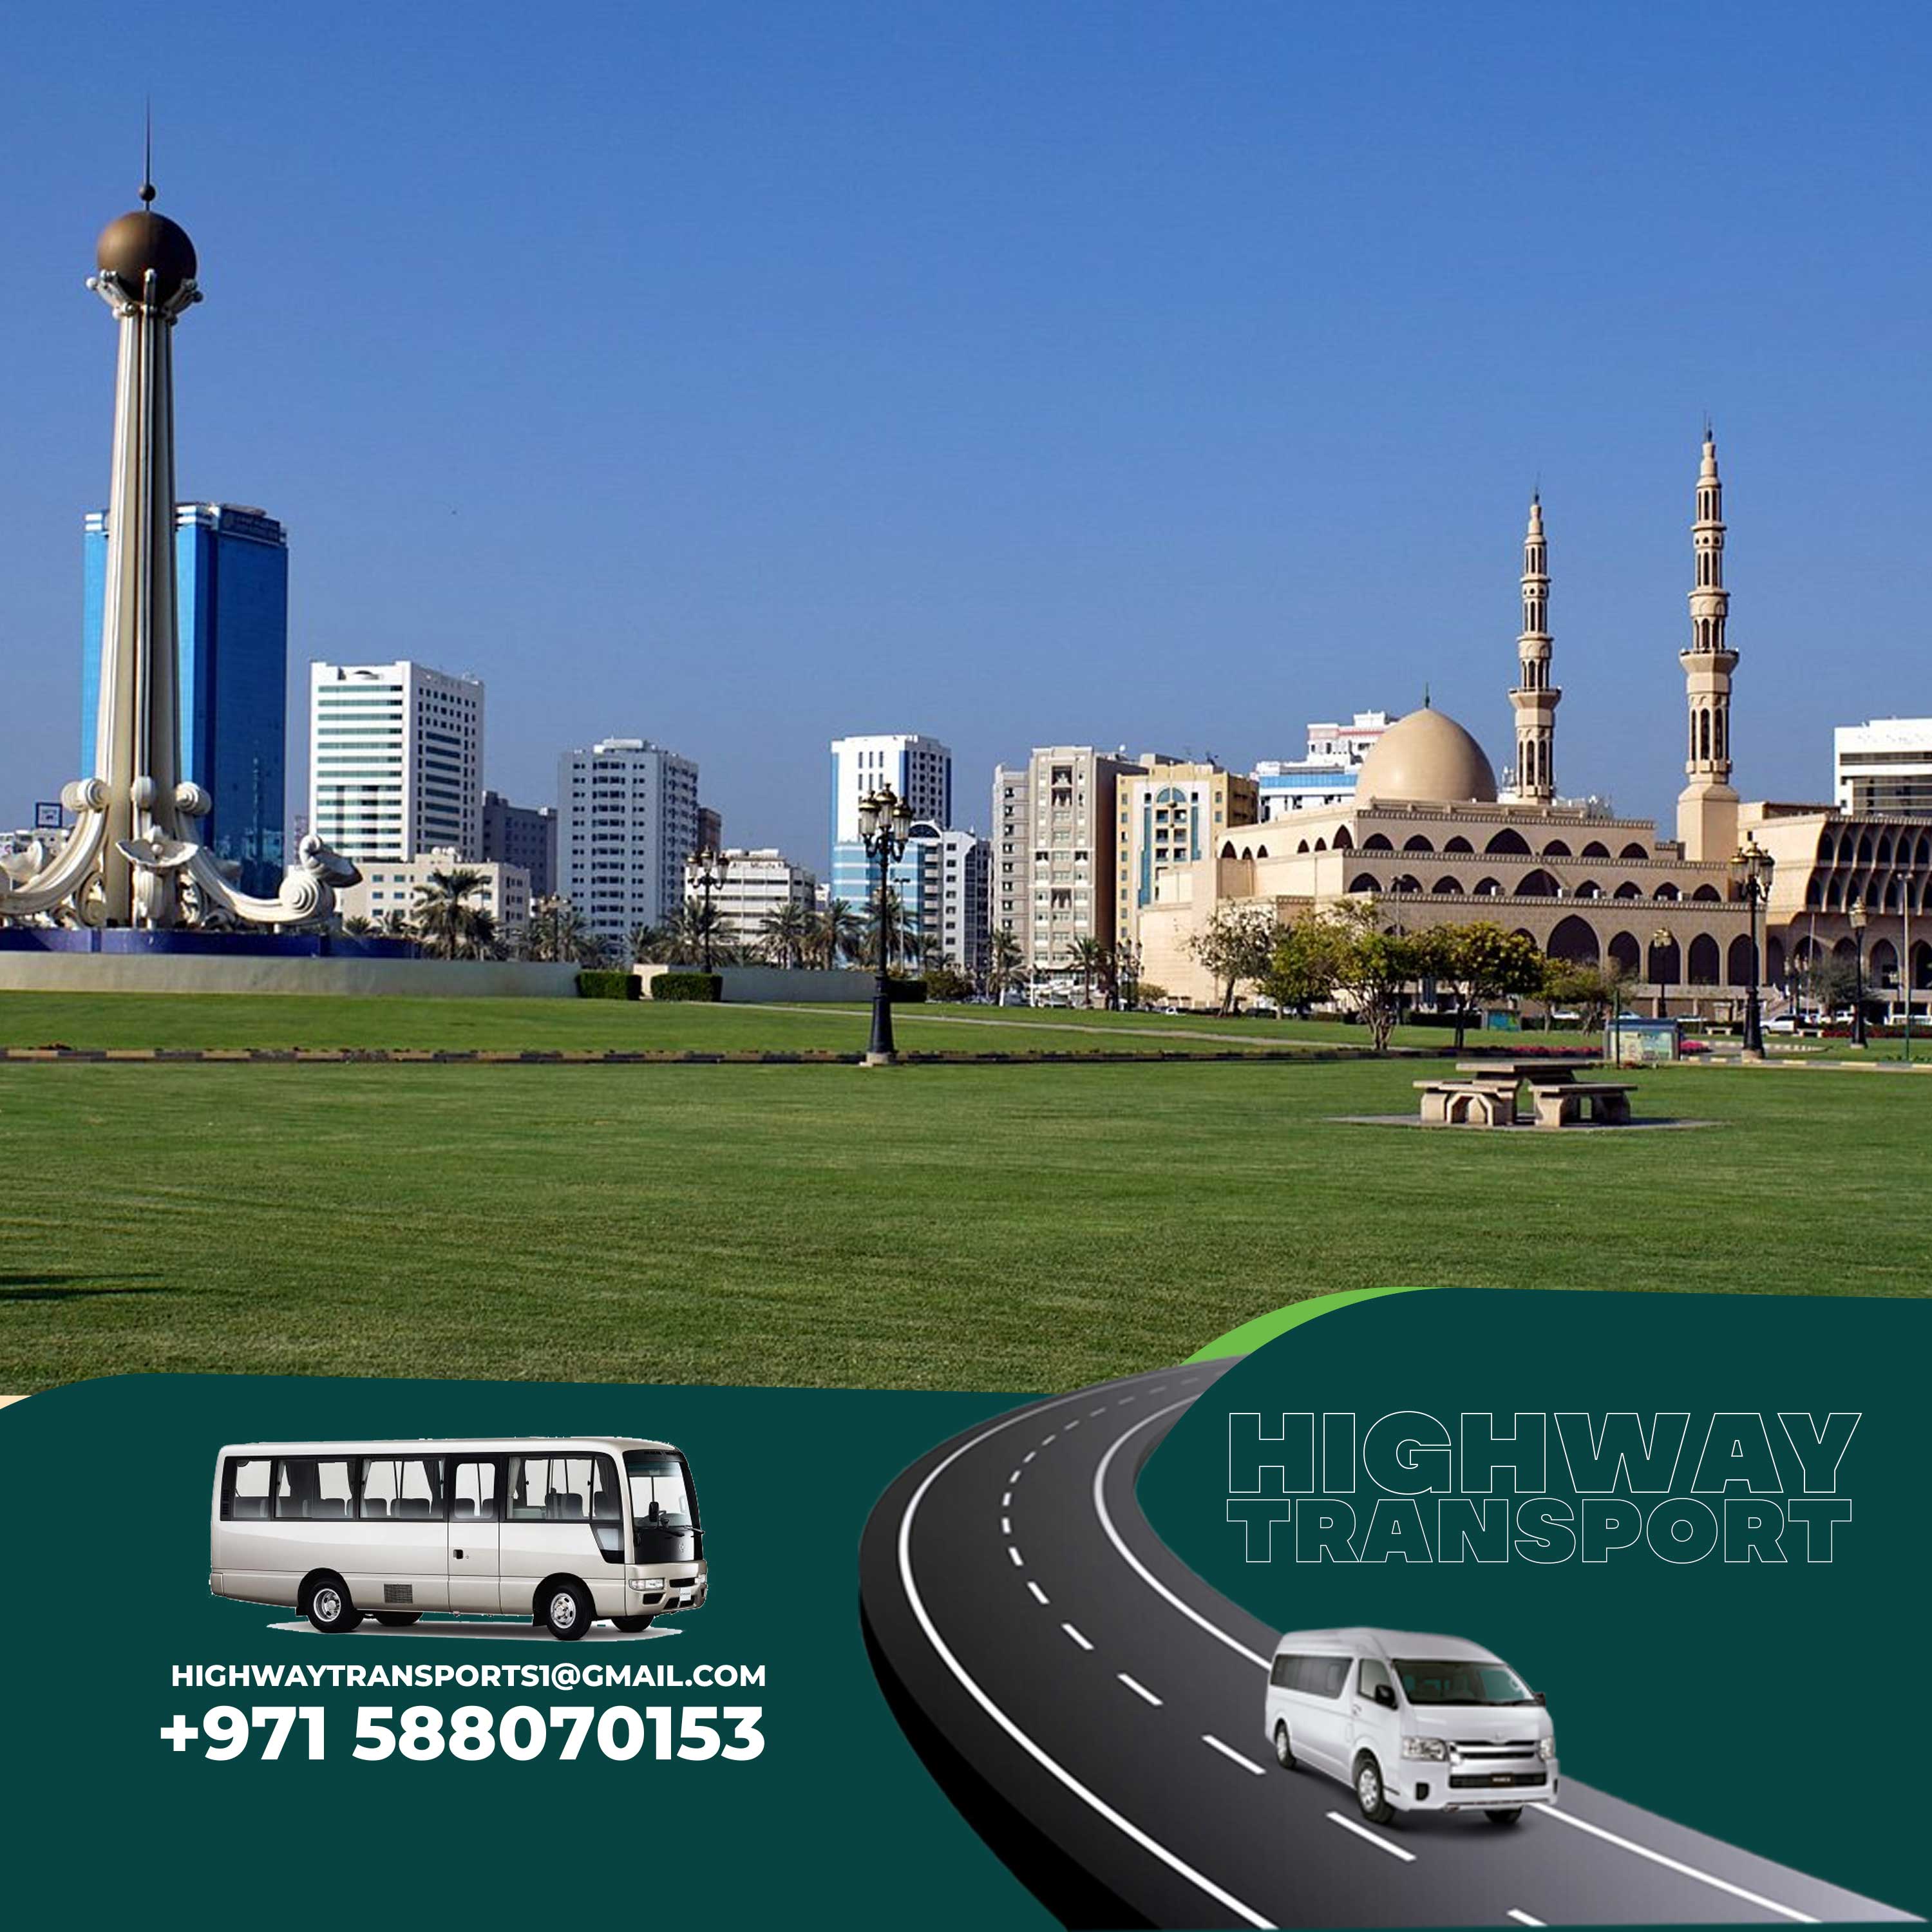 Al Ittihad Square Park in Sharjah featuring lush greenery and scenic views of Union Square Park, Central Park Sharjah